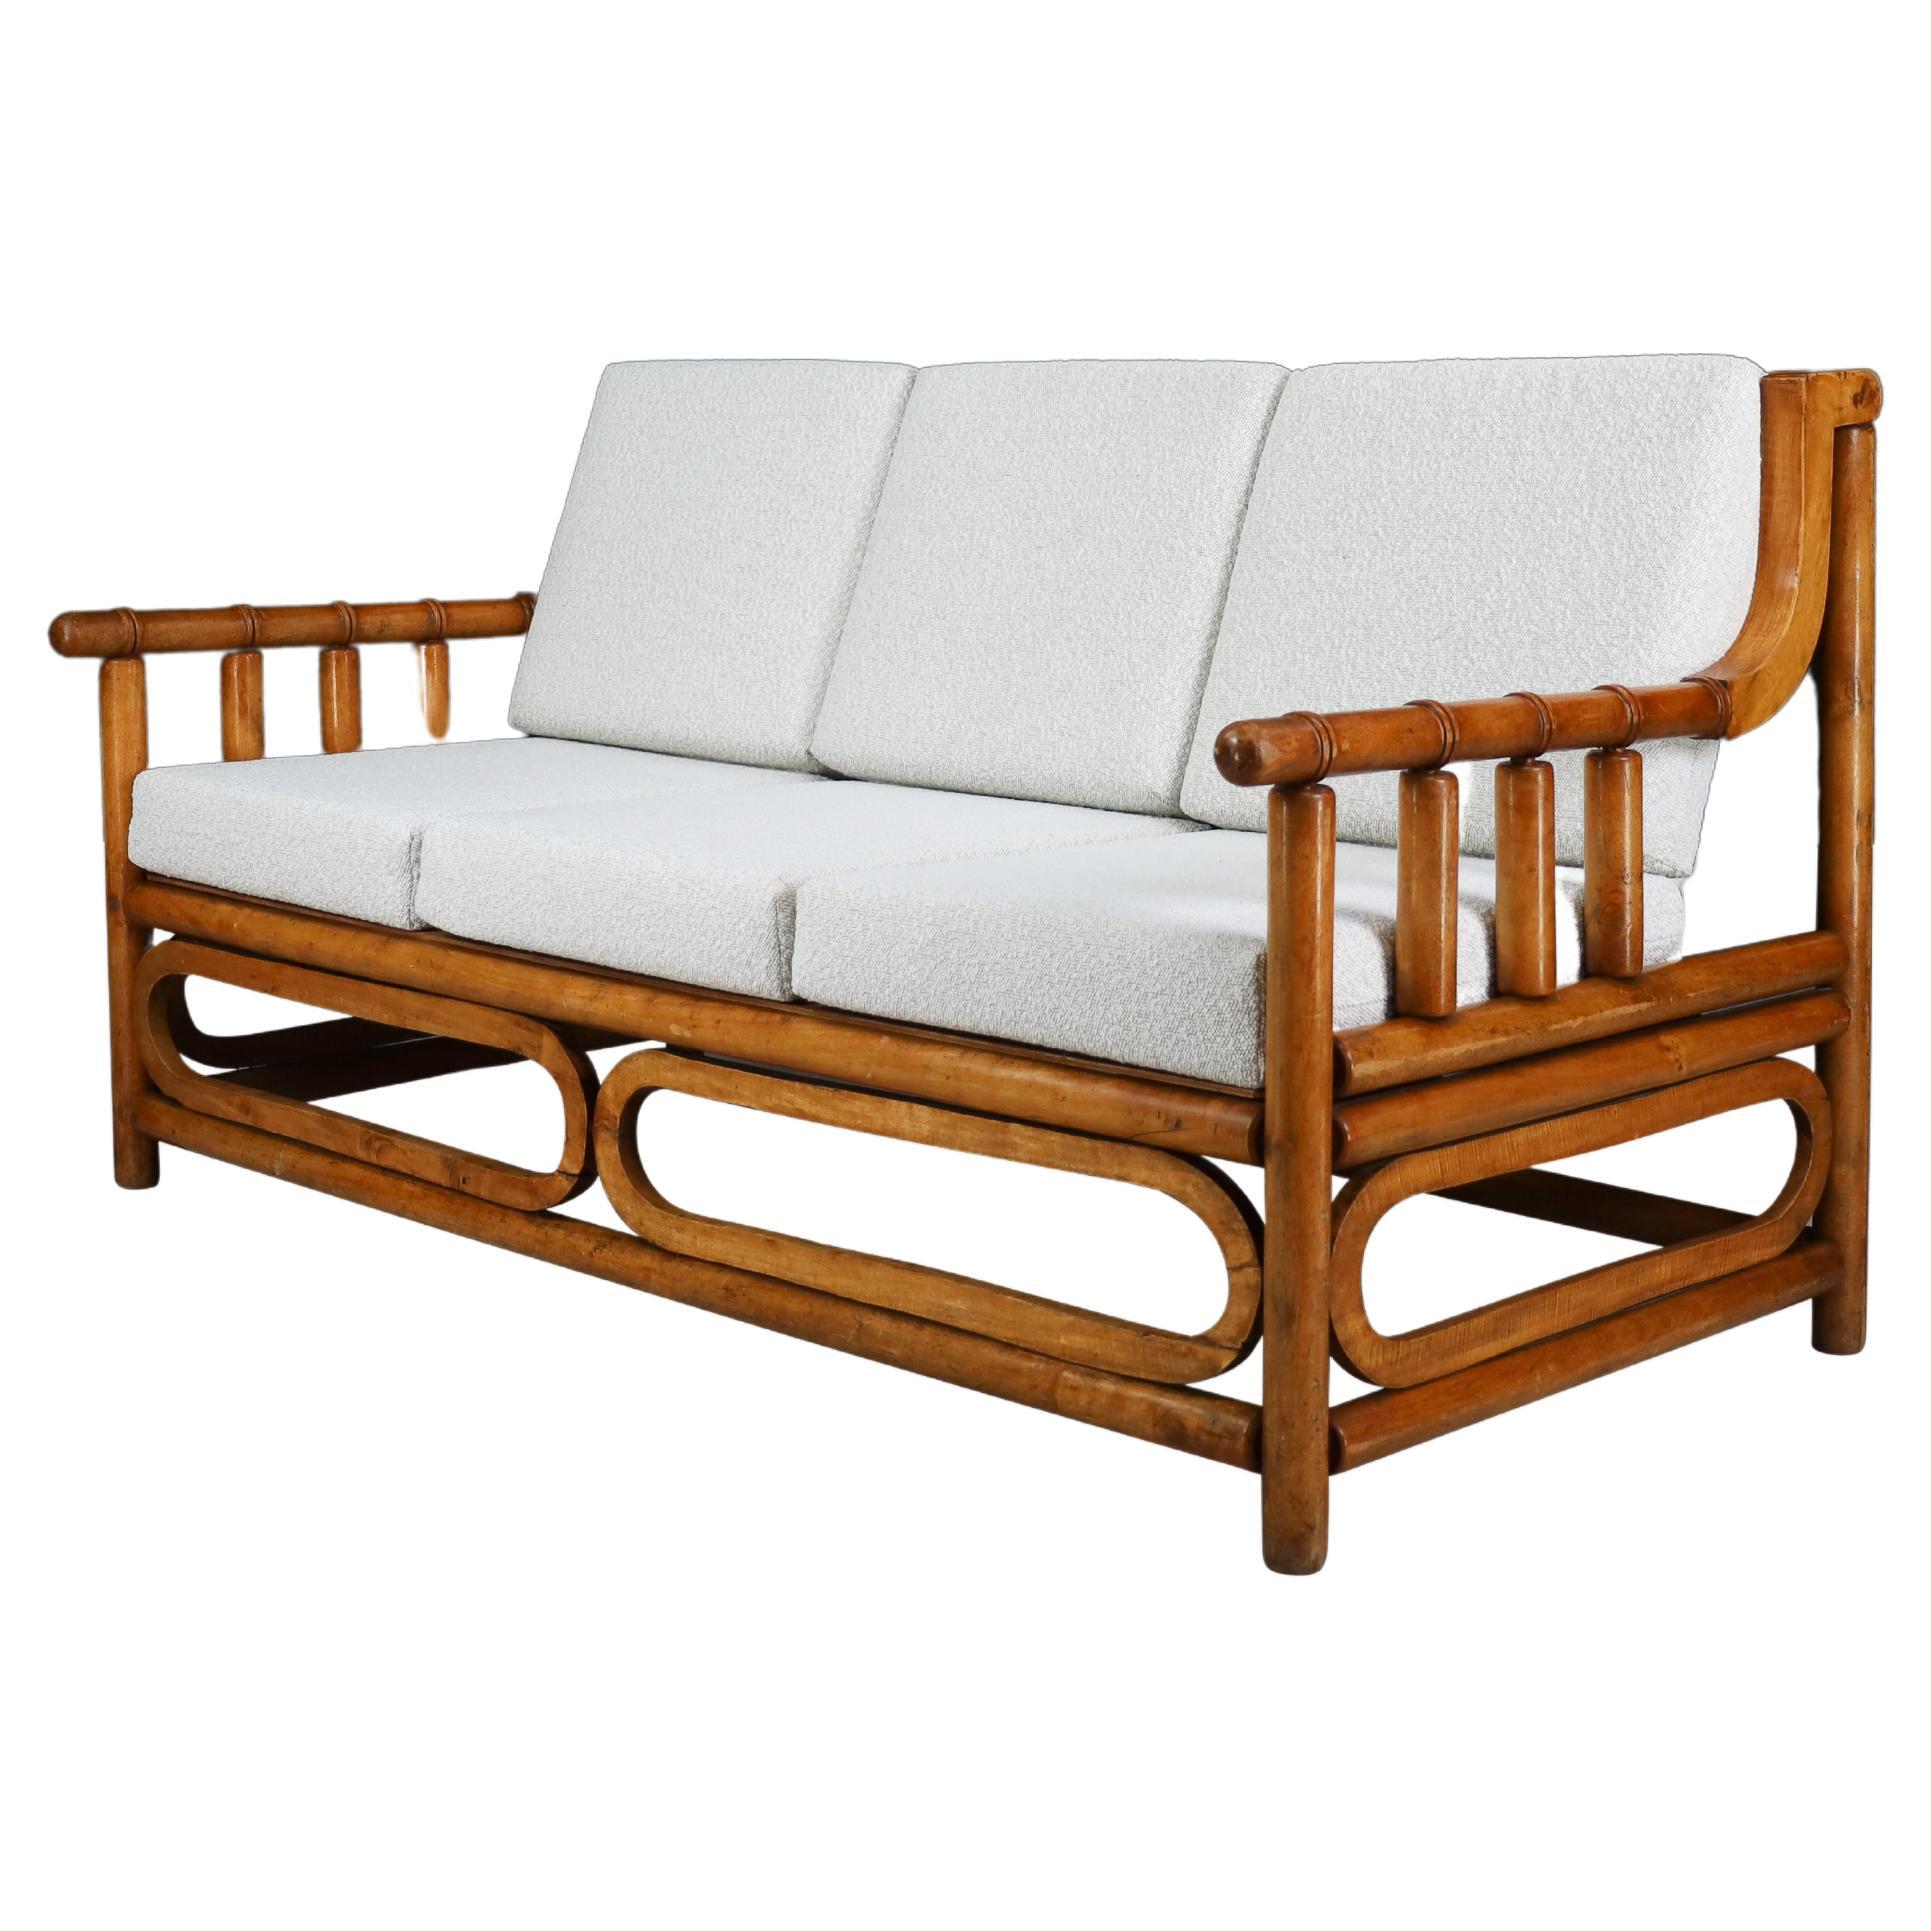 Midcentury Bamboo Wood and Bouclé Upholstery Sofa, France, 1950s  For Sale